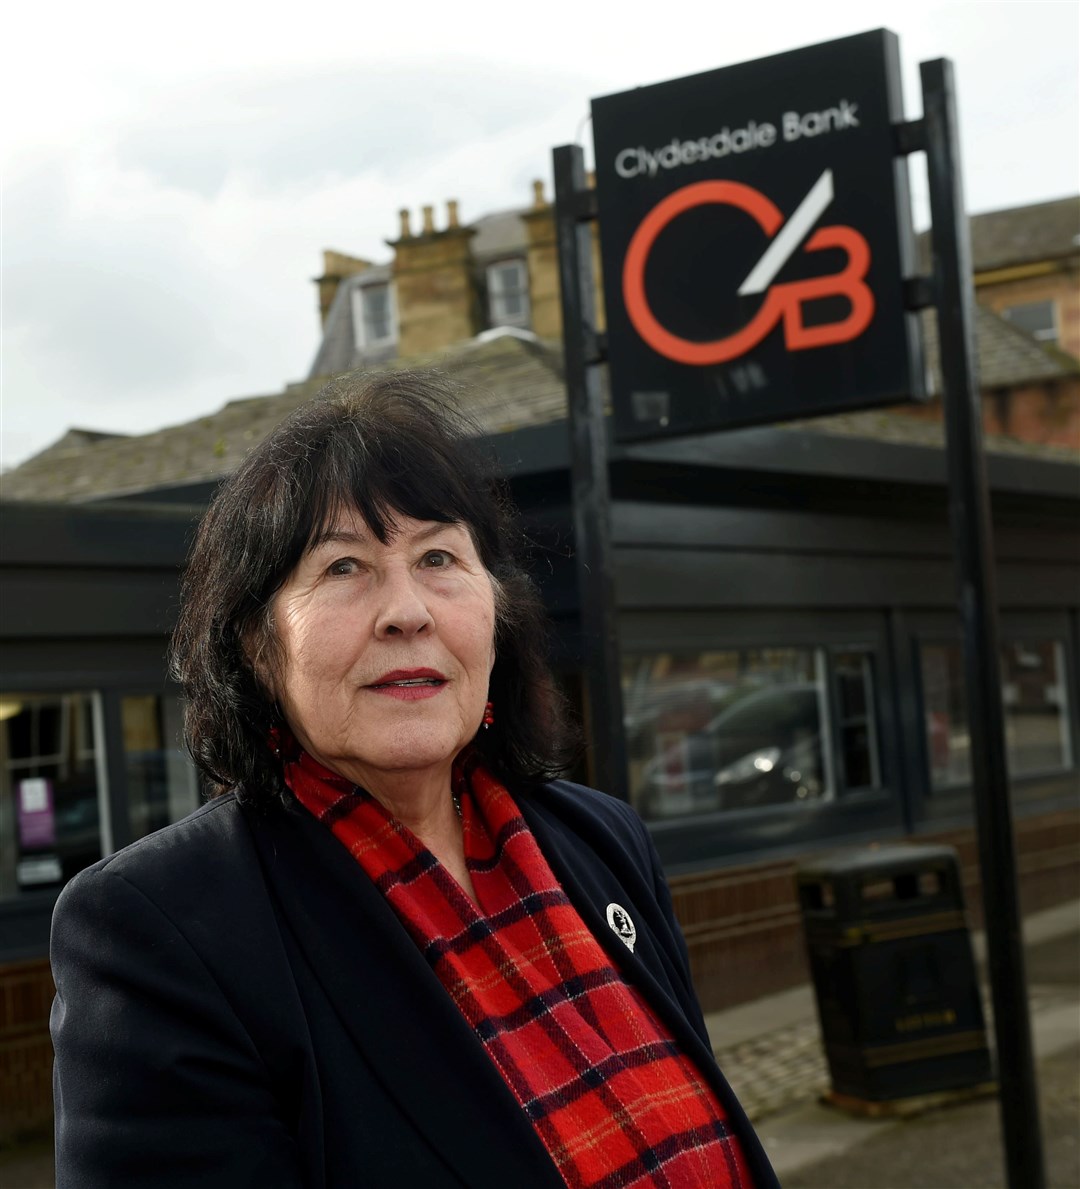 Margaret Paterson outside the Dingwall branch of the Clydesdale bank which is due to close on June 1....Picture: Callum Mackay..